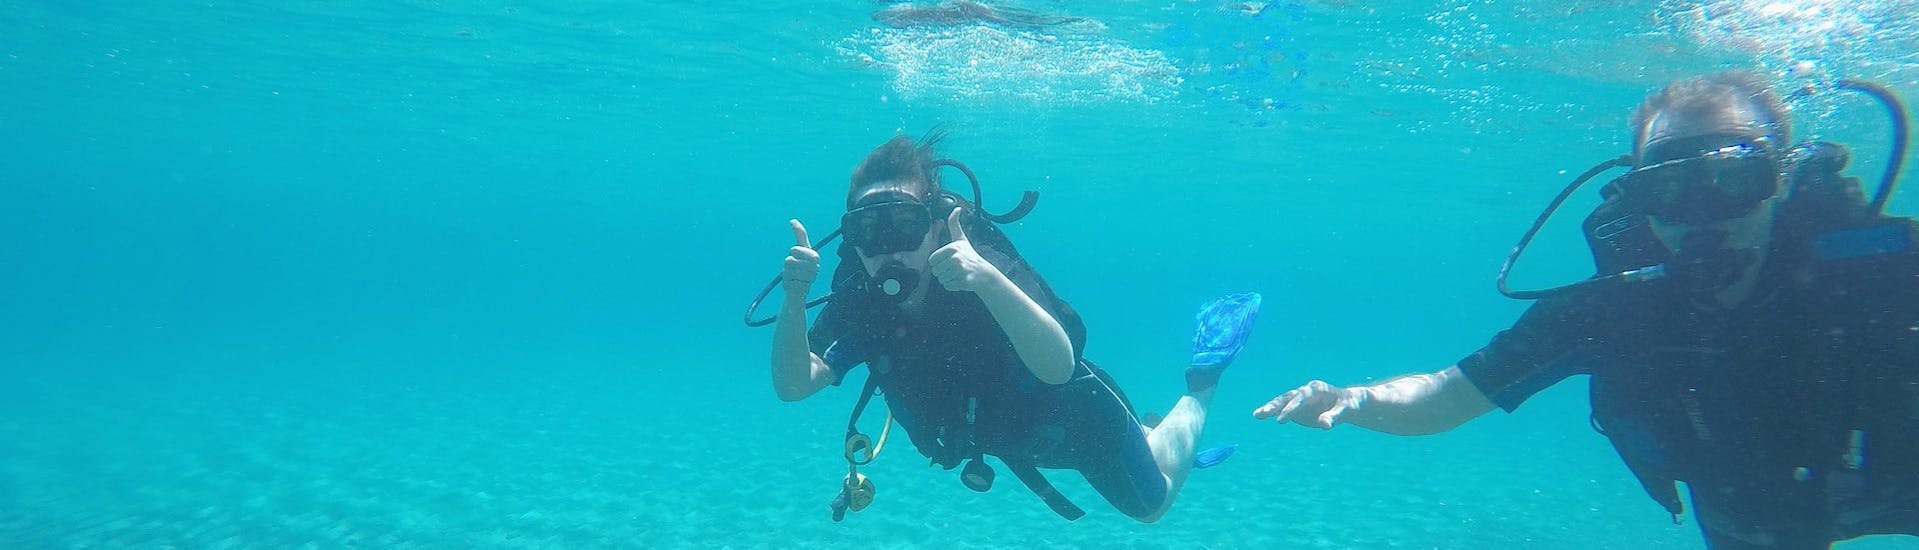 Girl gives a thumbs up to the camera during the discover scuba diving course hosted by St. Nicholas Beach Watersports.